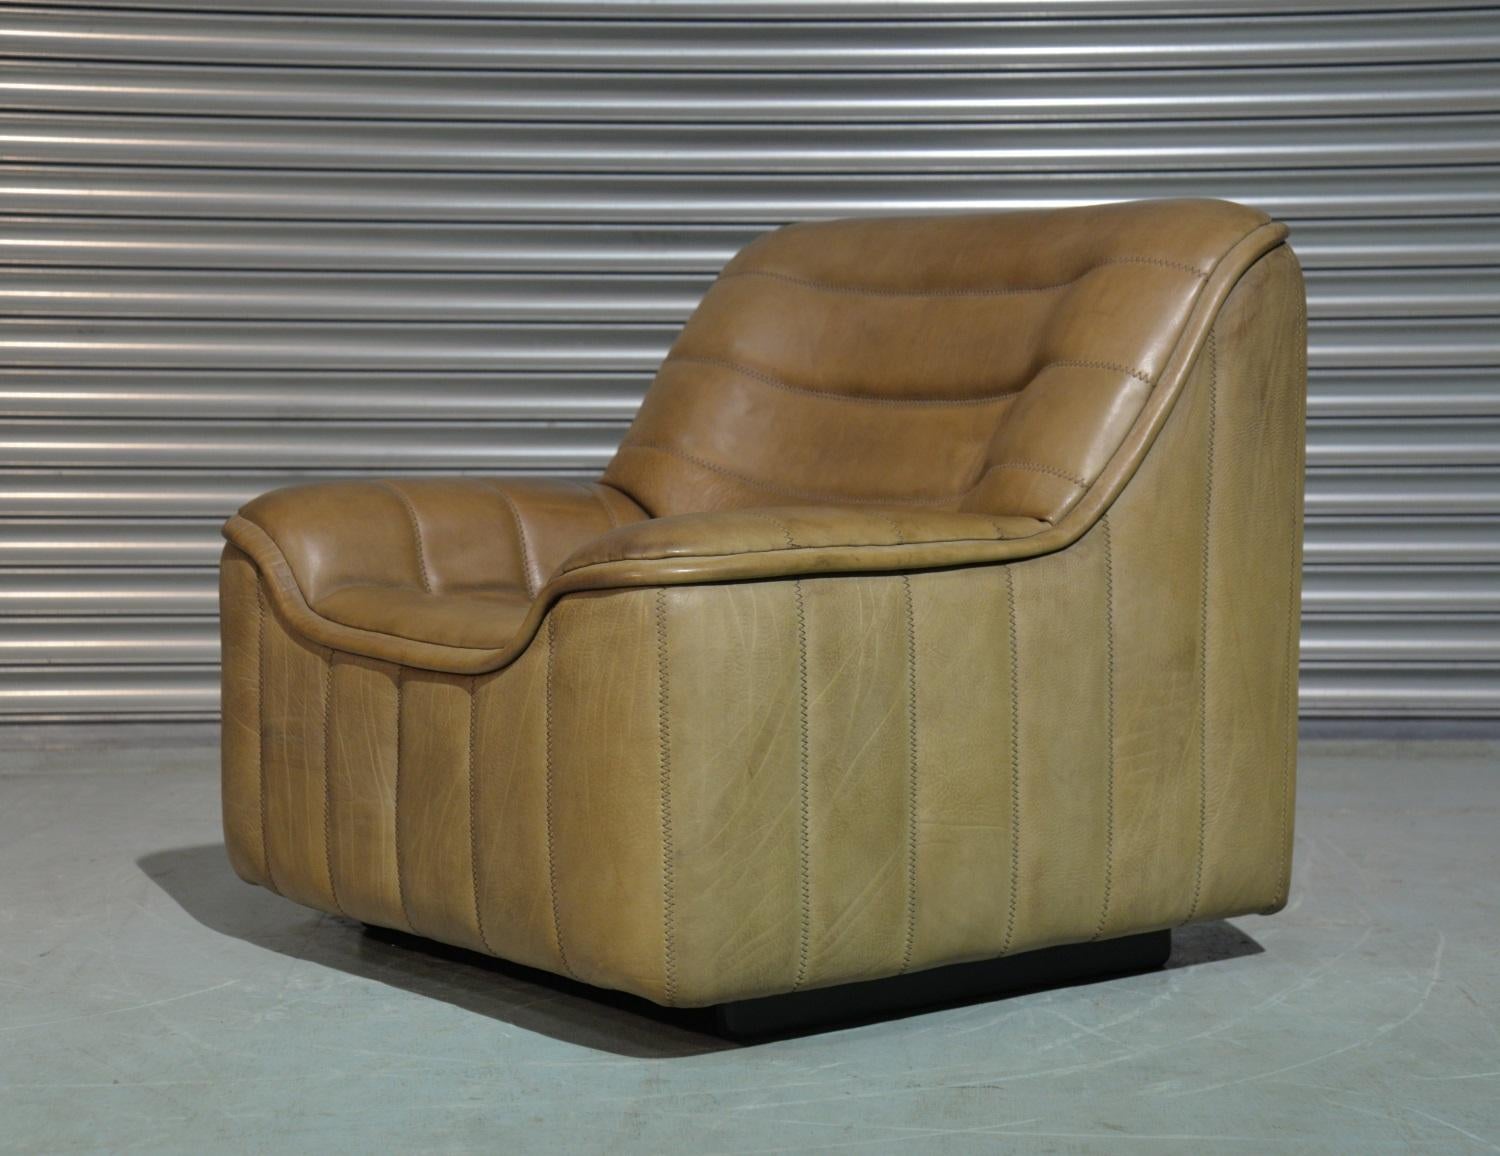 Discounted airfreight for our International customers ( from 2 weeks door to door )

We are delighted to bring to you an ultra rare vintage De Sede DS 84 armchair. Hand built in the 1970s by De Sede craftsman in Switzerland, this piece is